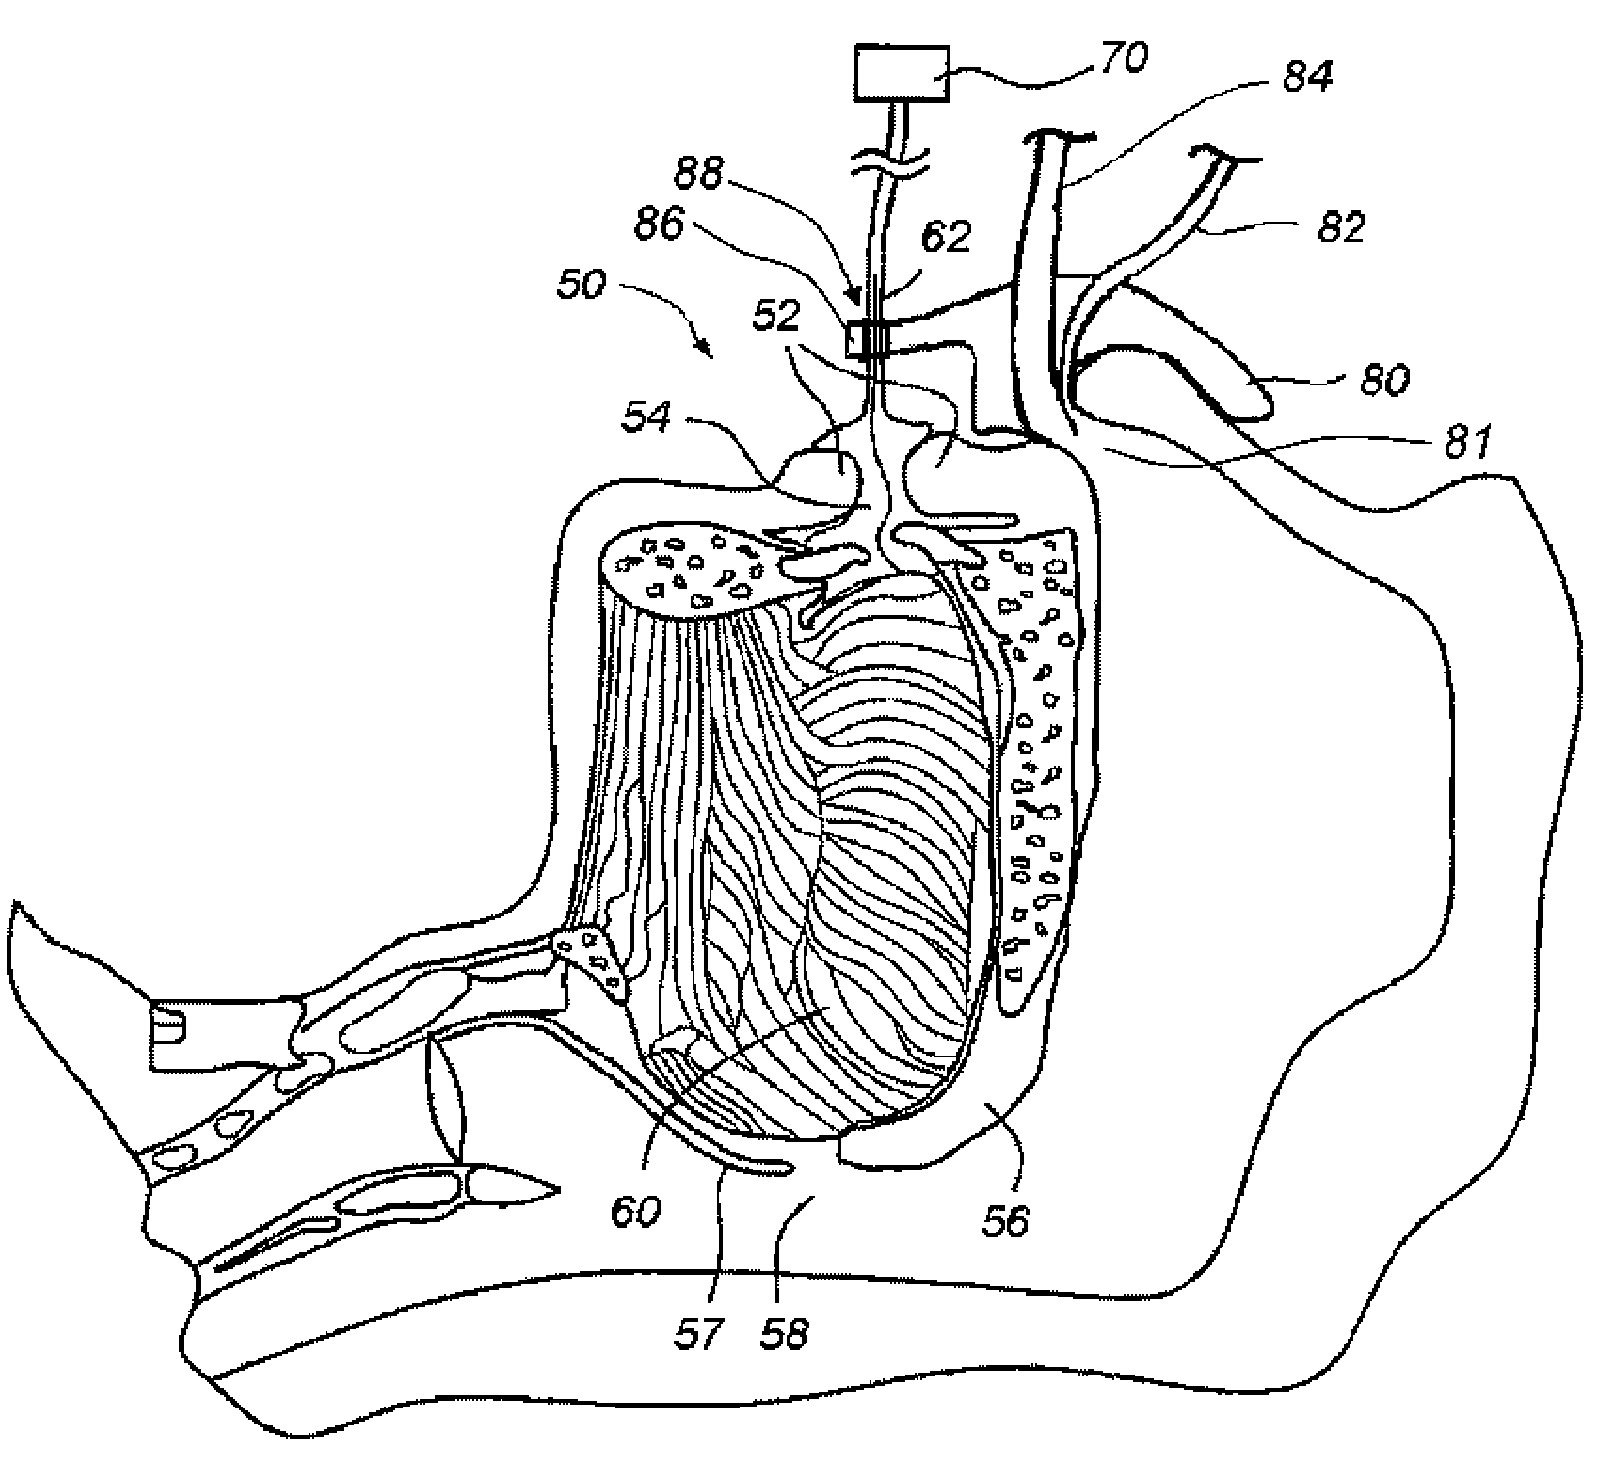 Methods and devices for maintaining an open airway